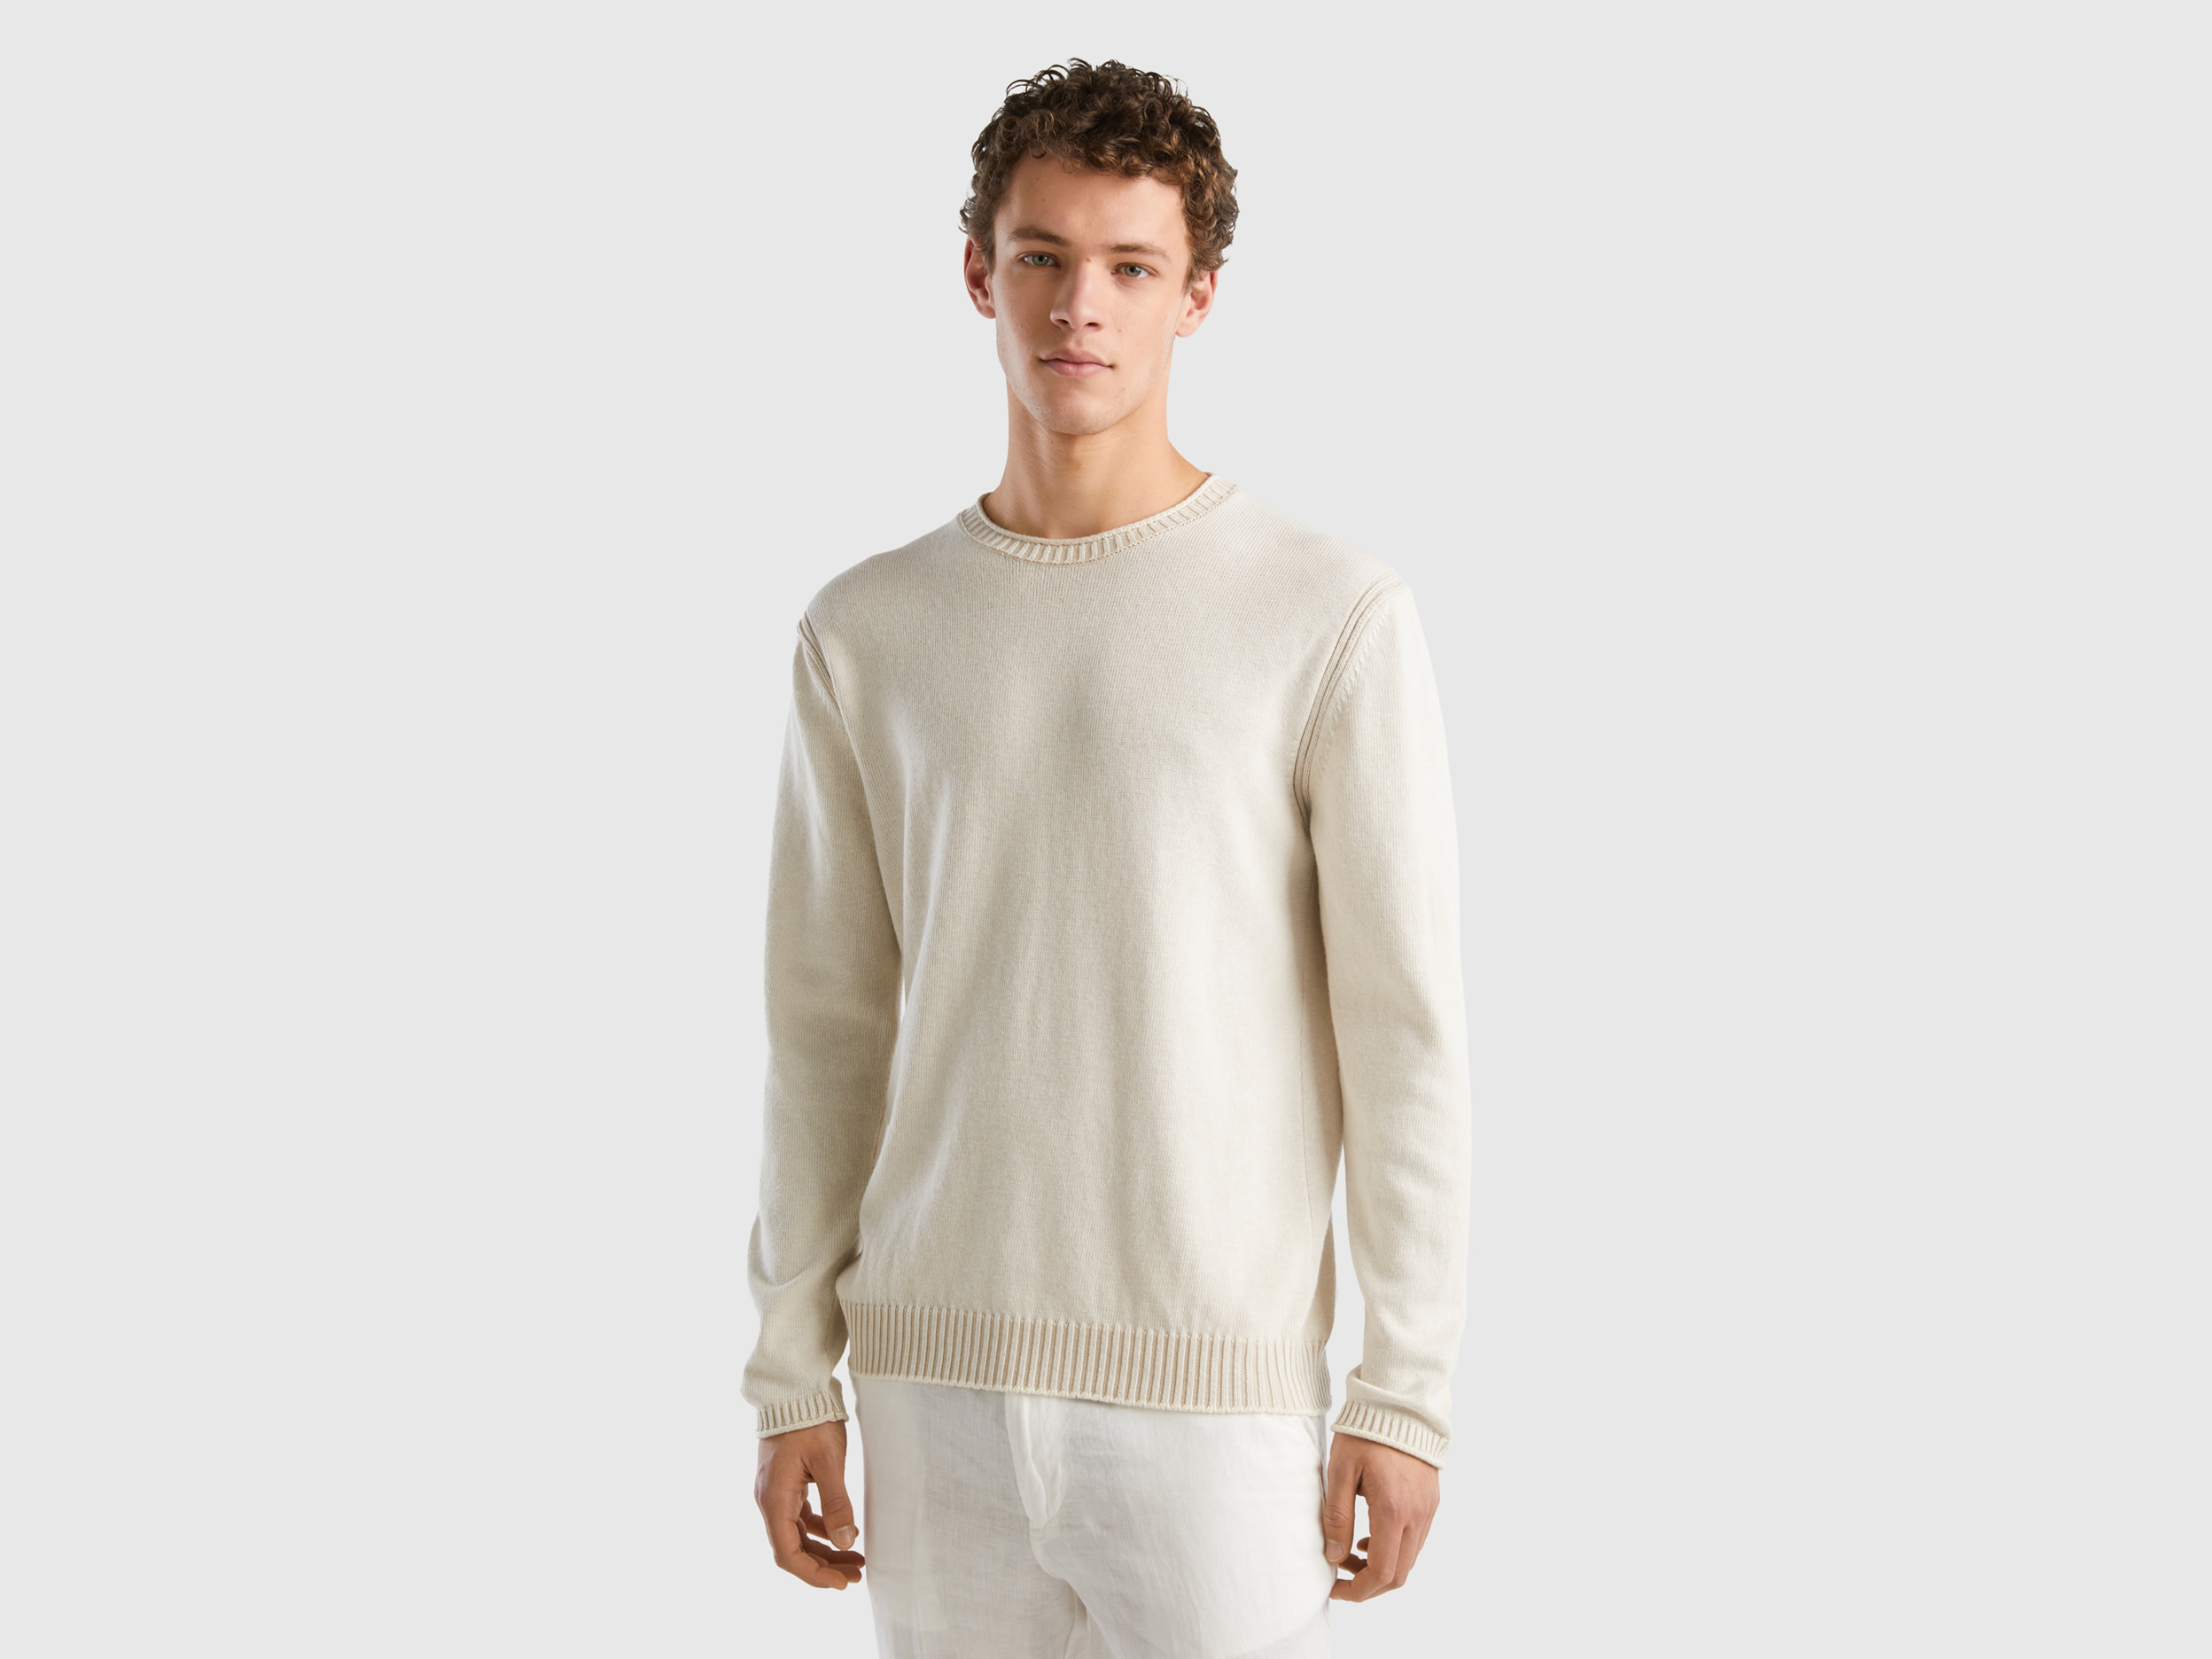 Image of Benetton, Sweater In Recycled Cotton Blend, size XXL, Creamy White, Men